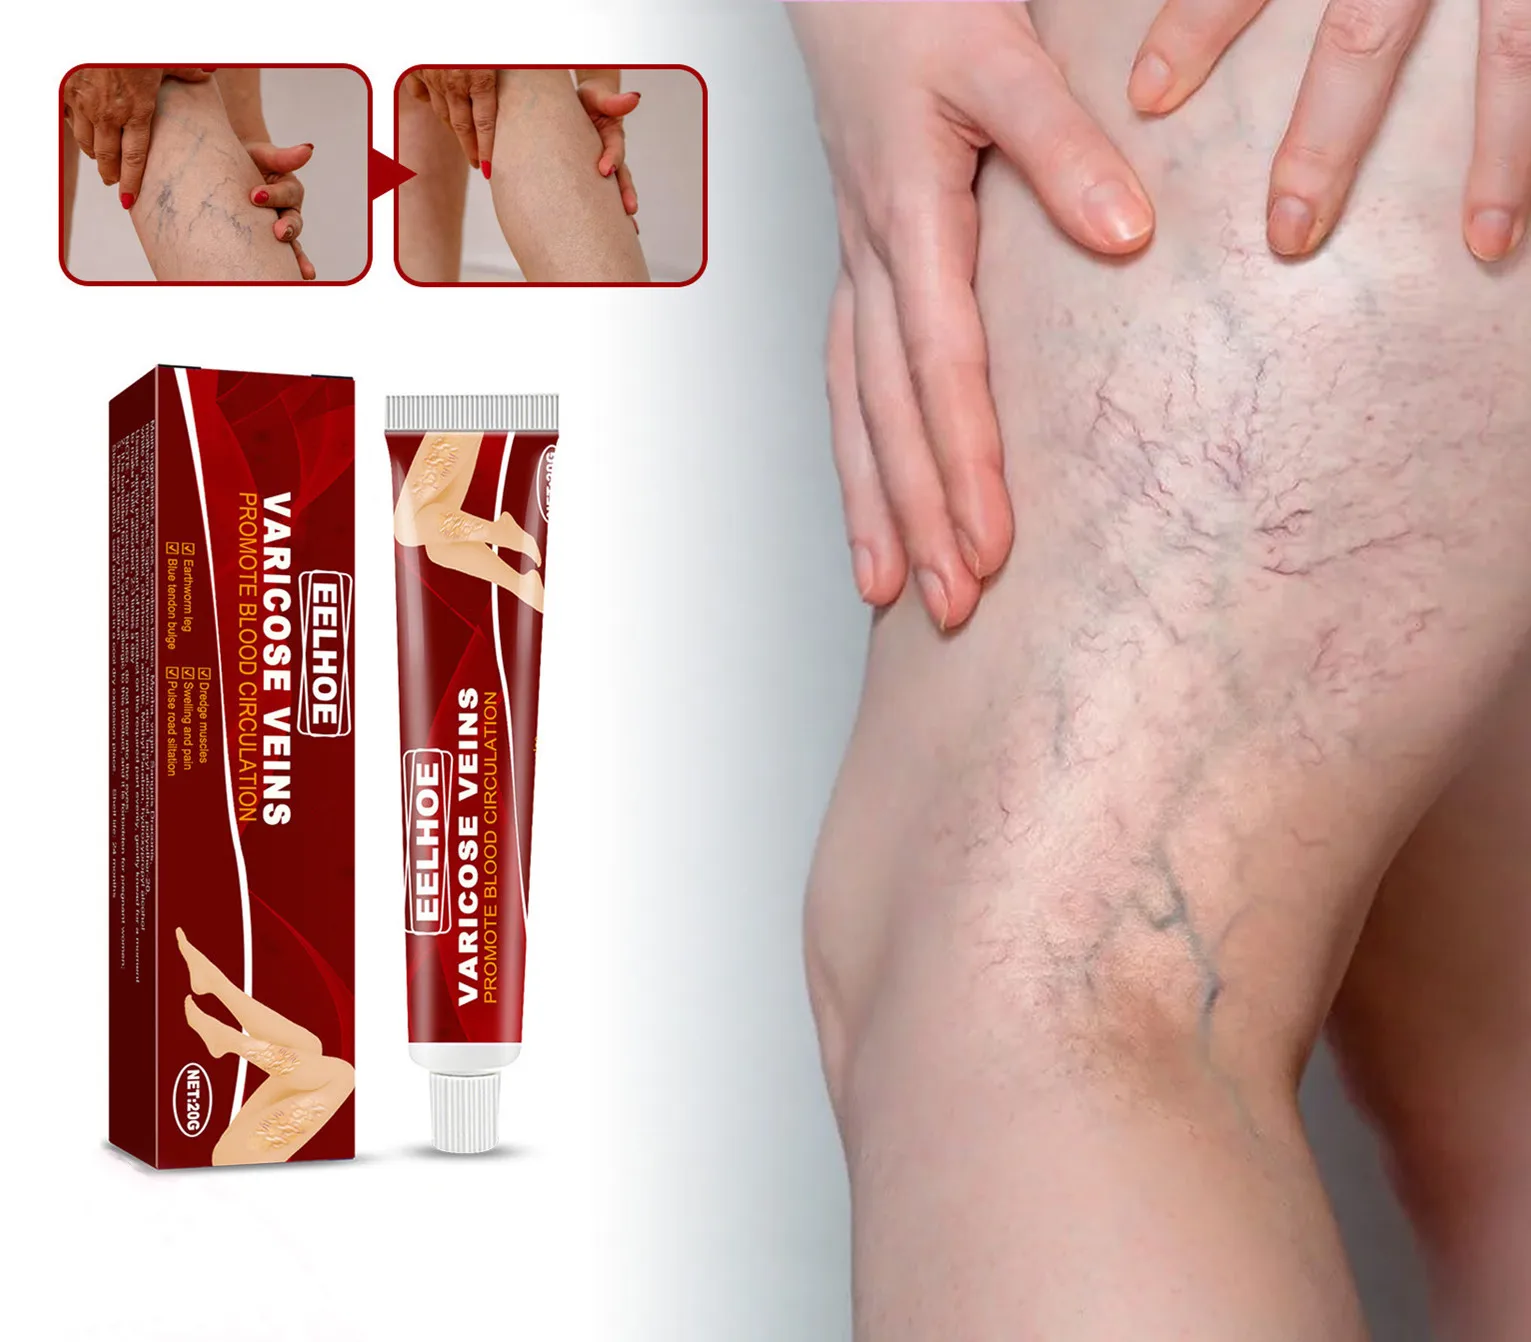 

Effective Herbal Varicose Veins Relief Cream Vasculitis Phlebitis Spider Pain Relief Ointment Herb Plaster Beauty Body Care 20g